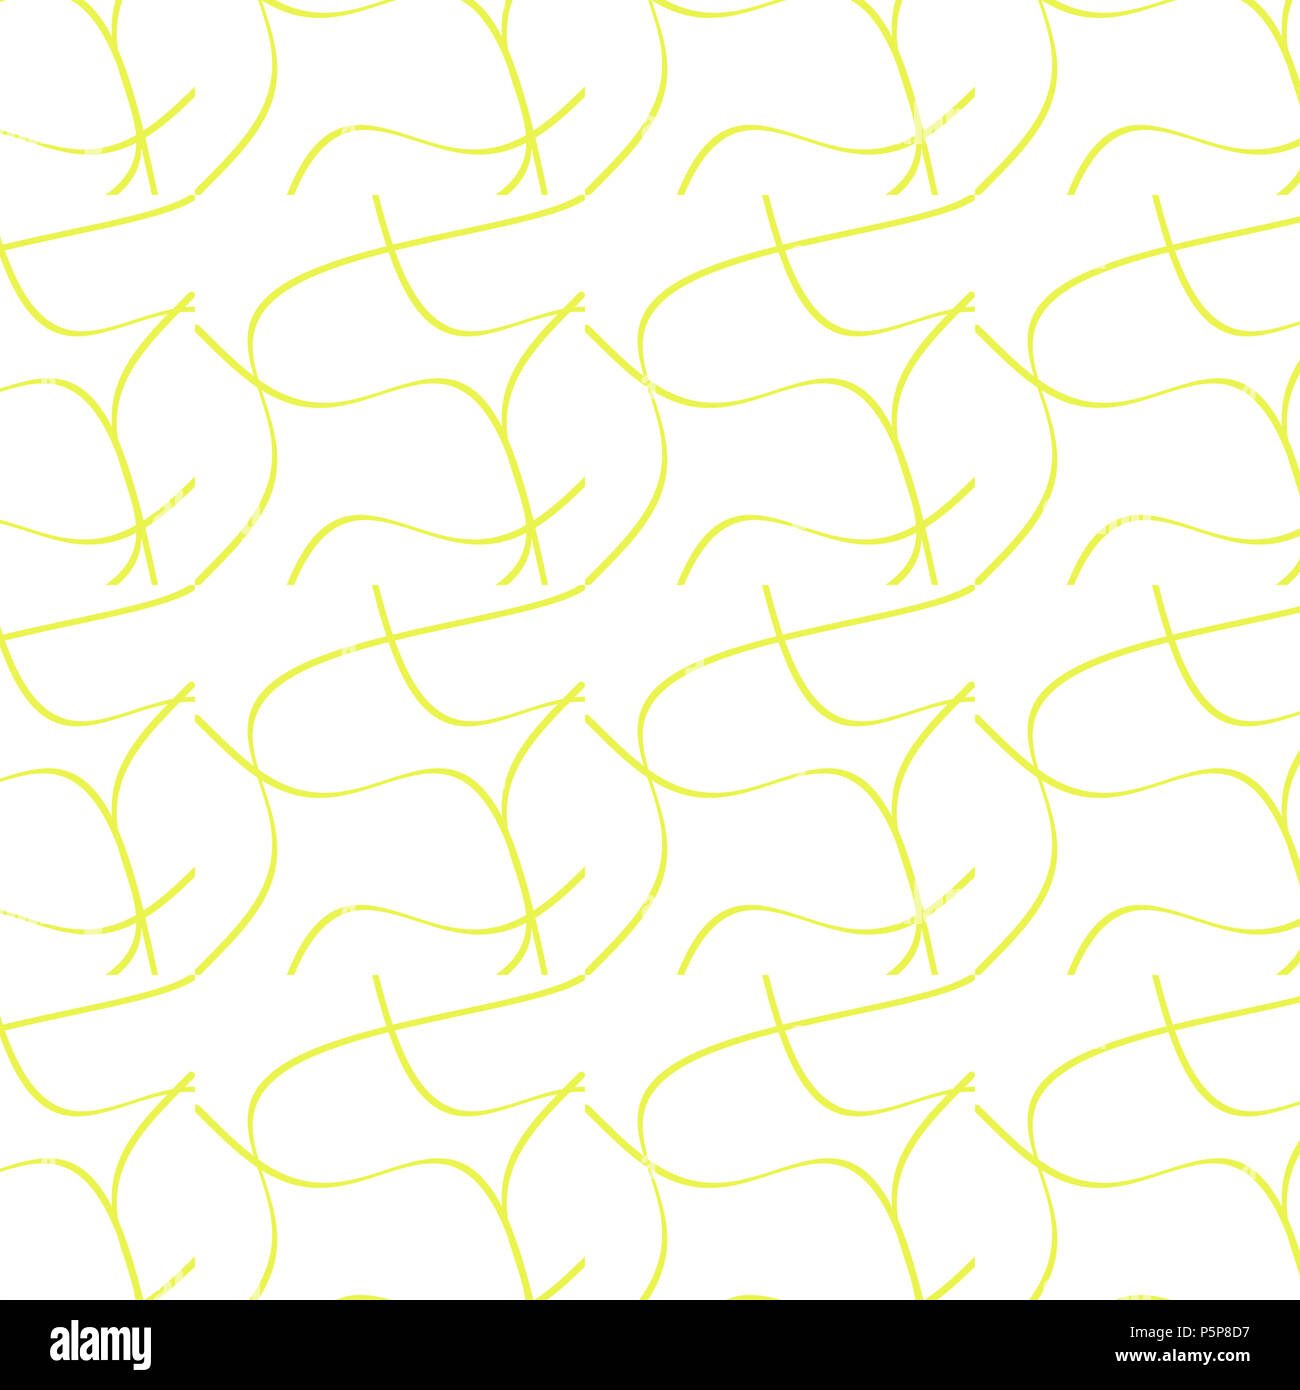 Background with yellow waves, wallpaper on white background Stock Photo